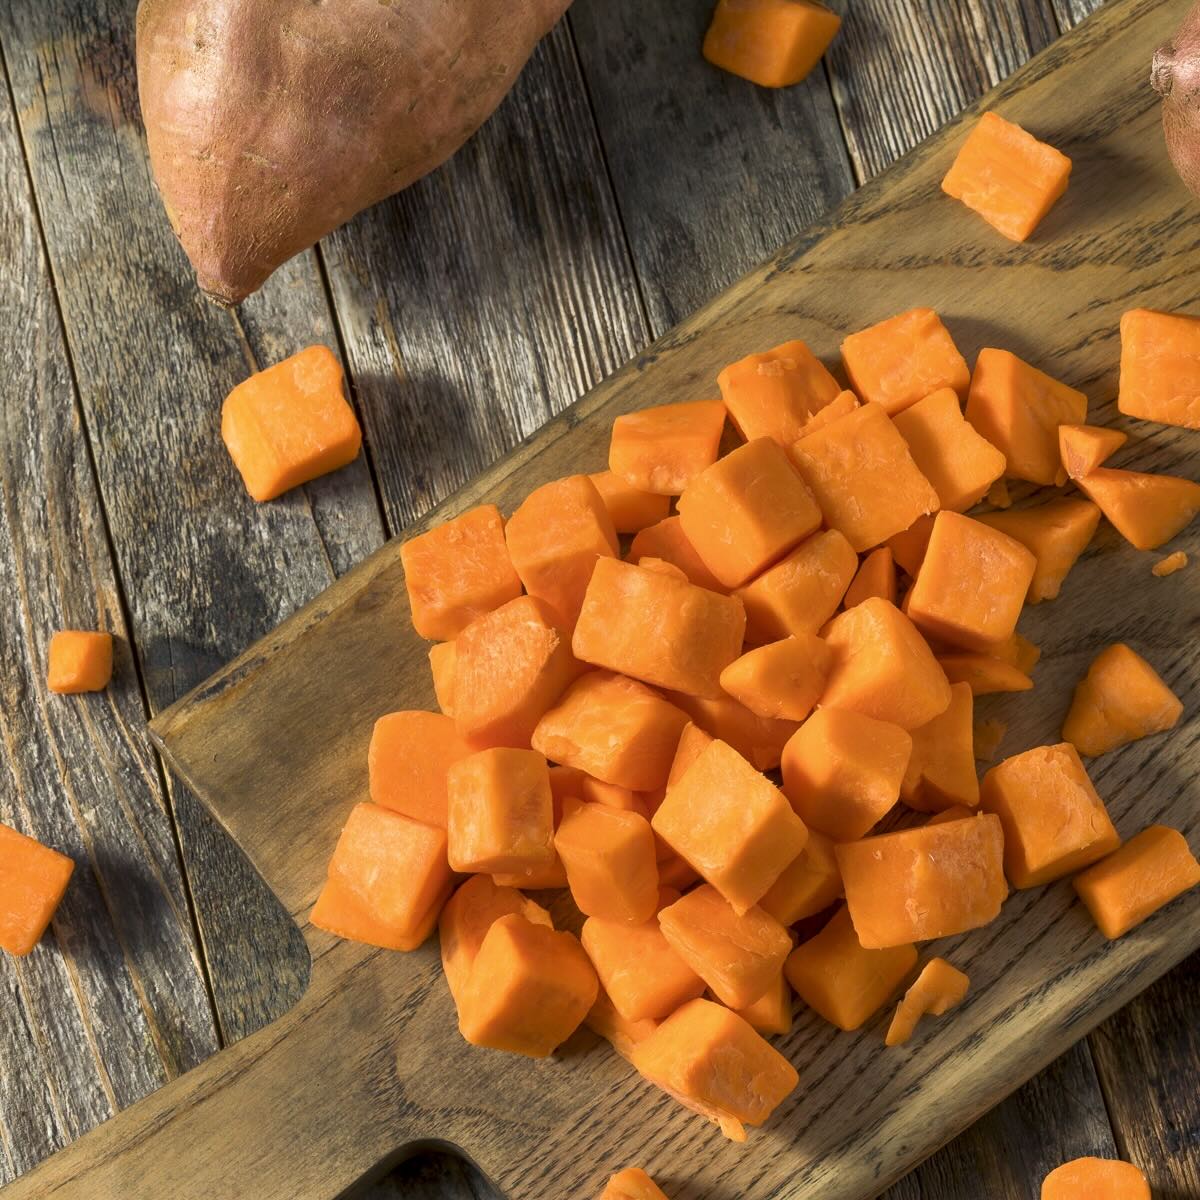 How To Store Sweet Potatoes In Freezer